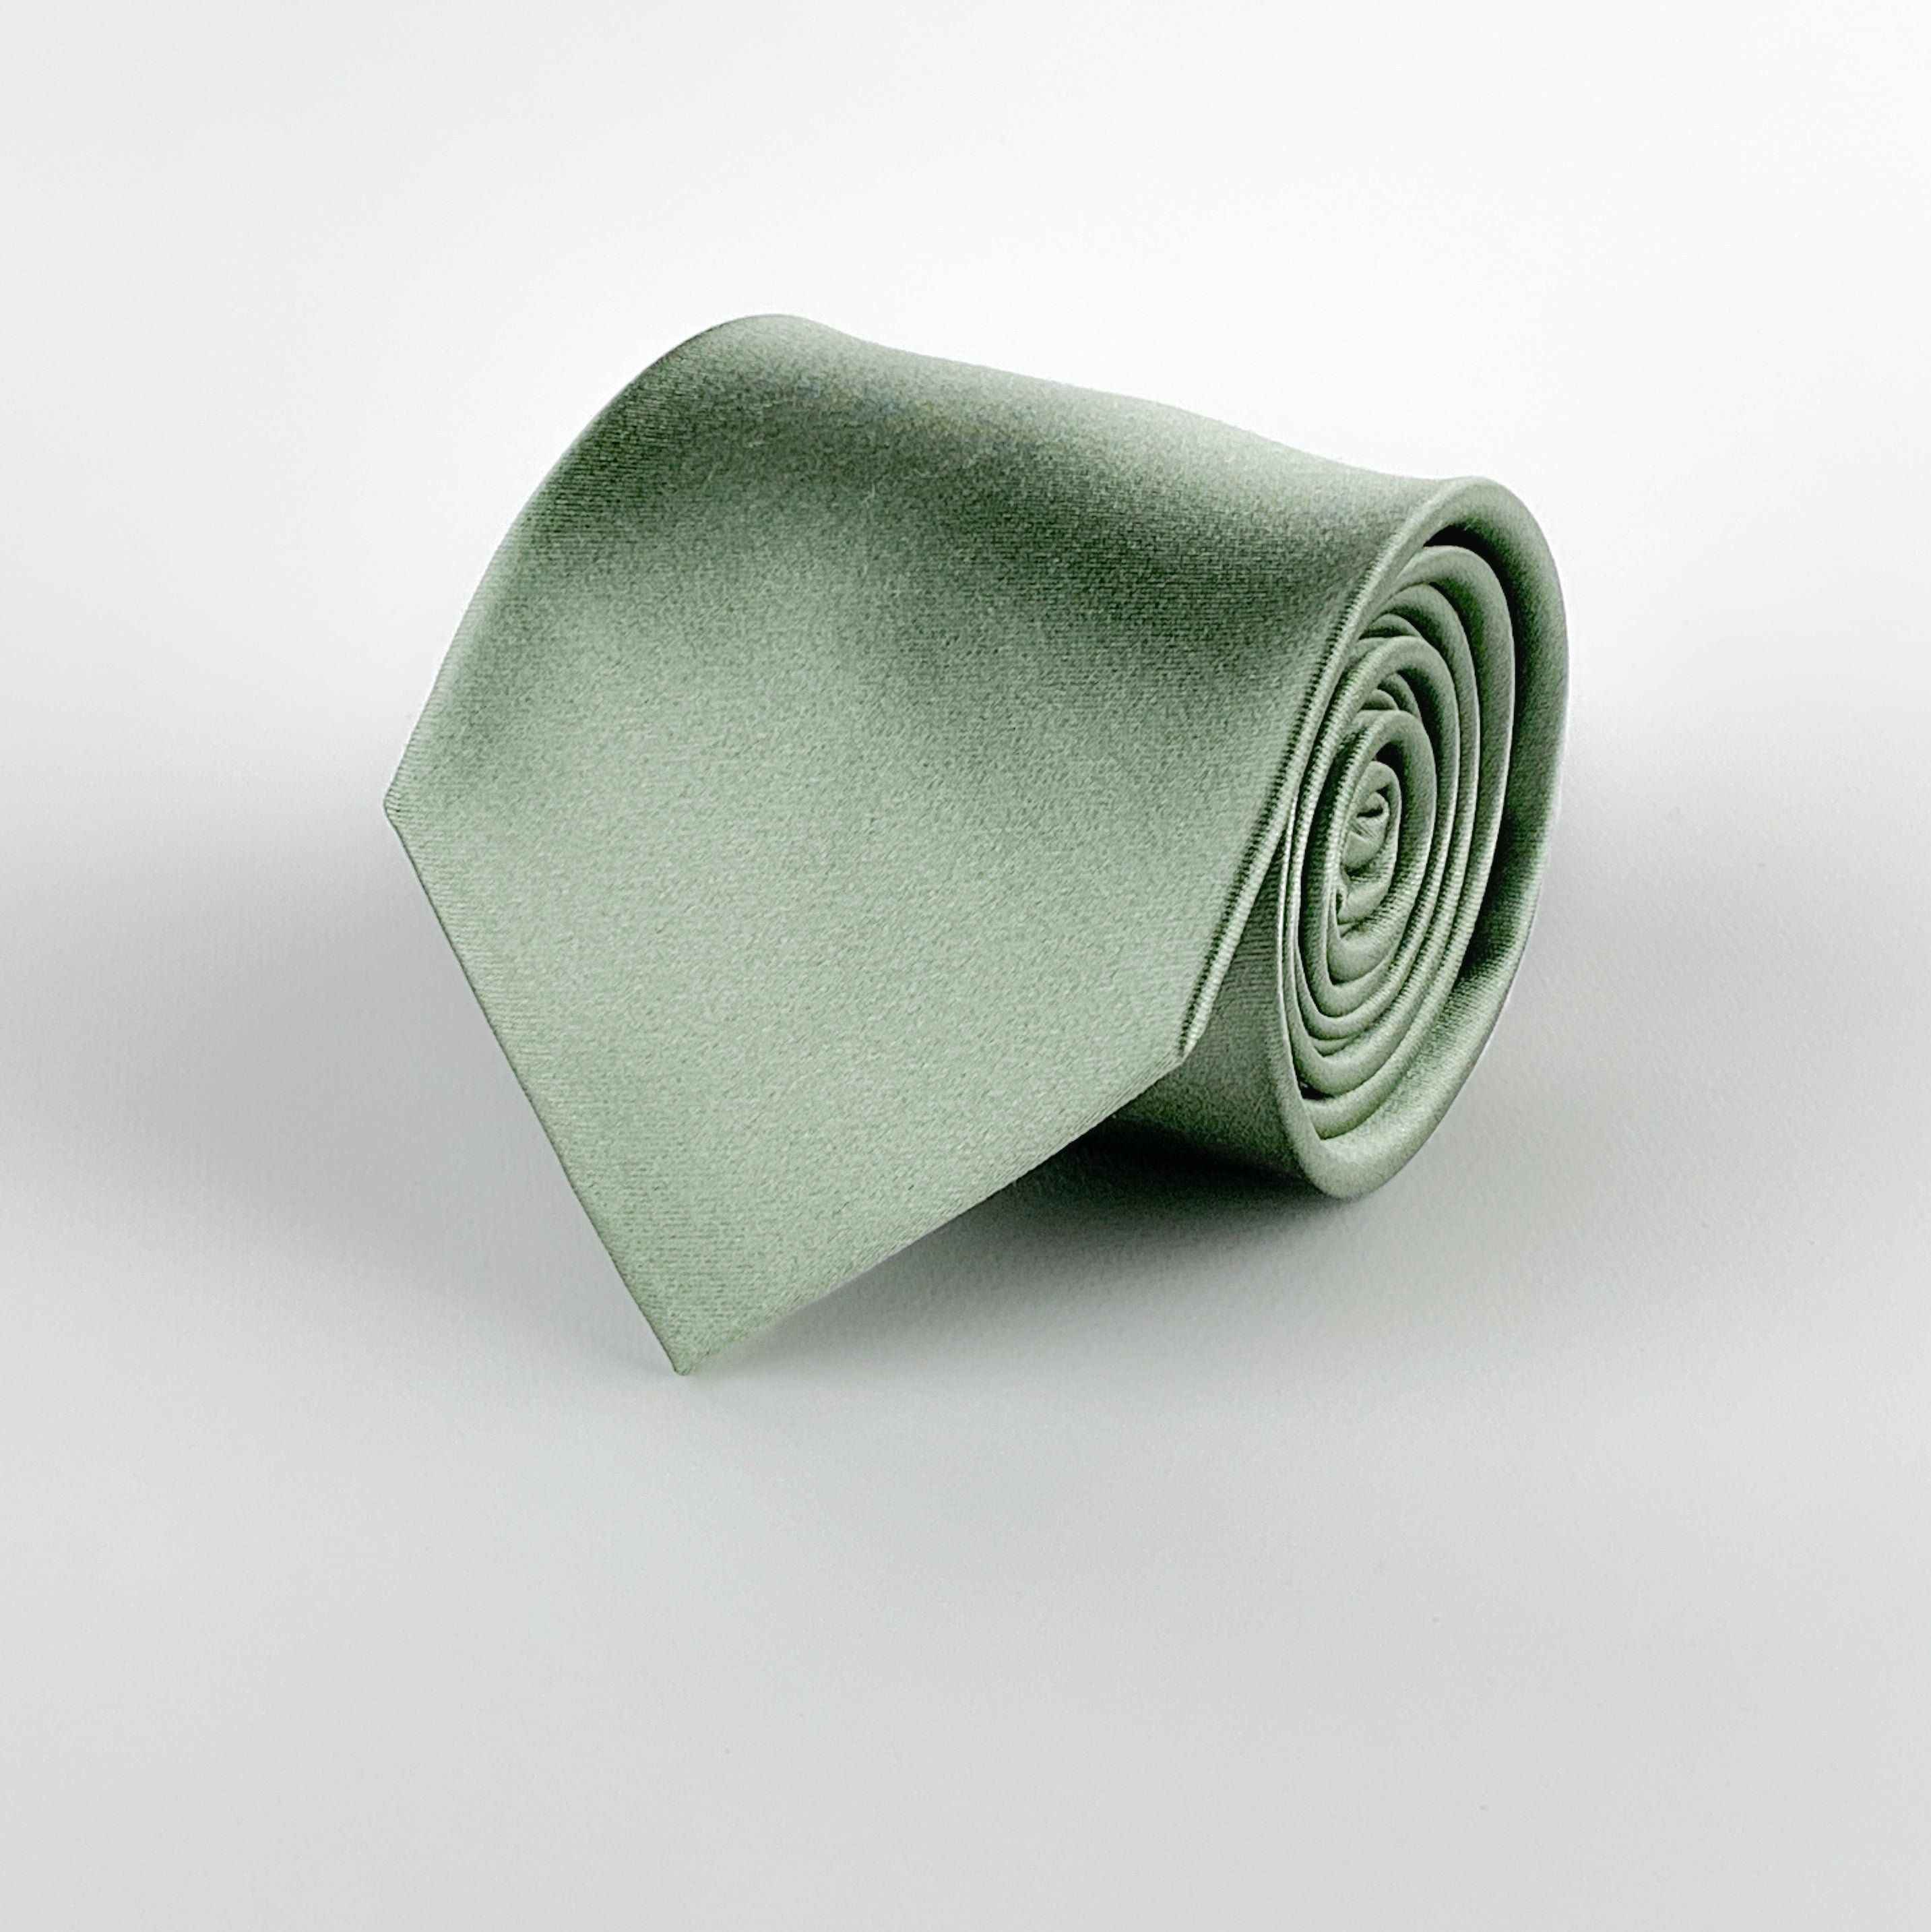 sage green mulberry silk satin tie rolled and placed on a white background